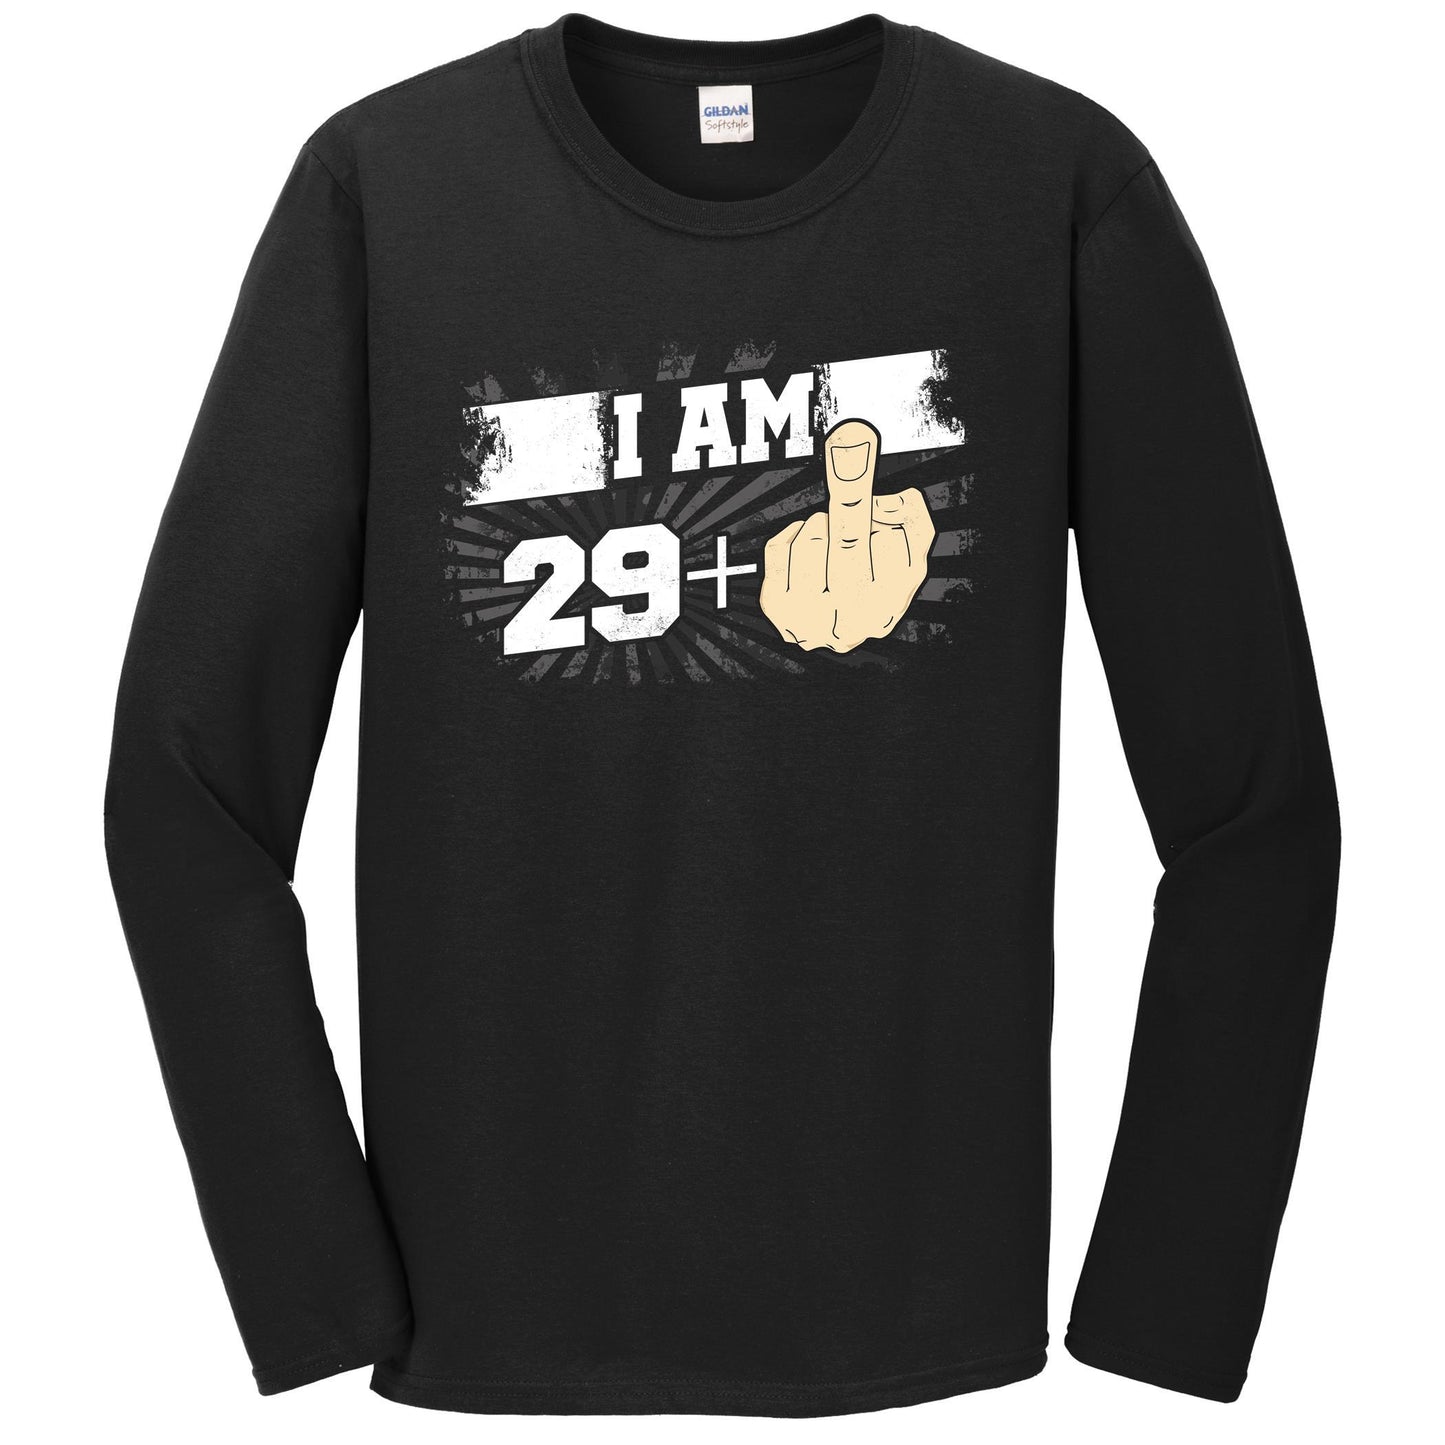 30th Birthday Shirt For Men - I Am 29 Plus Middle Finger 30 Years Old Long Sleeve T-Shirt